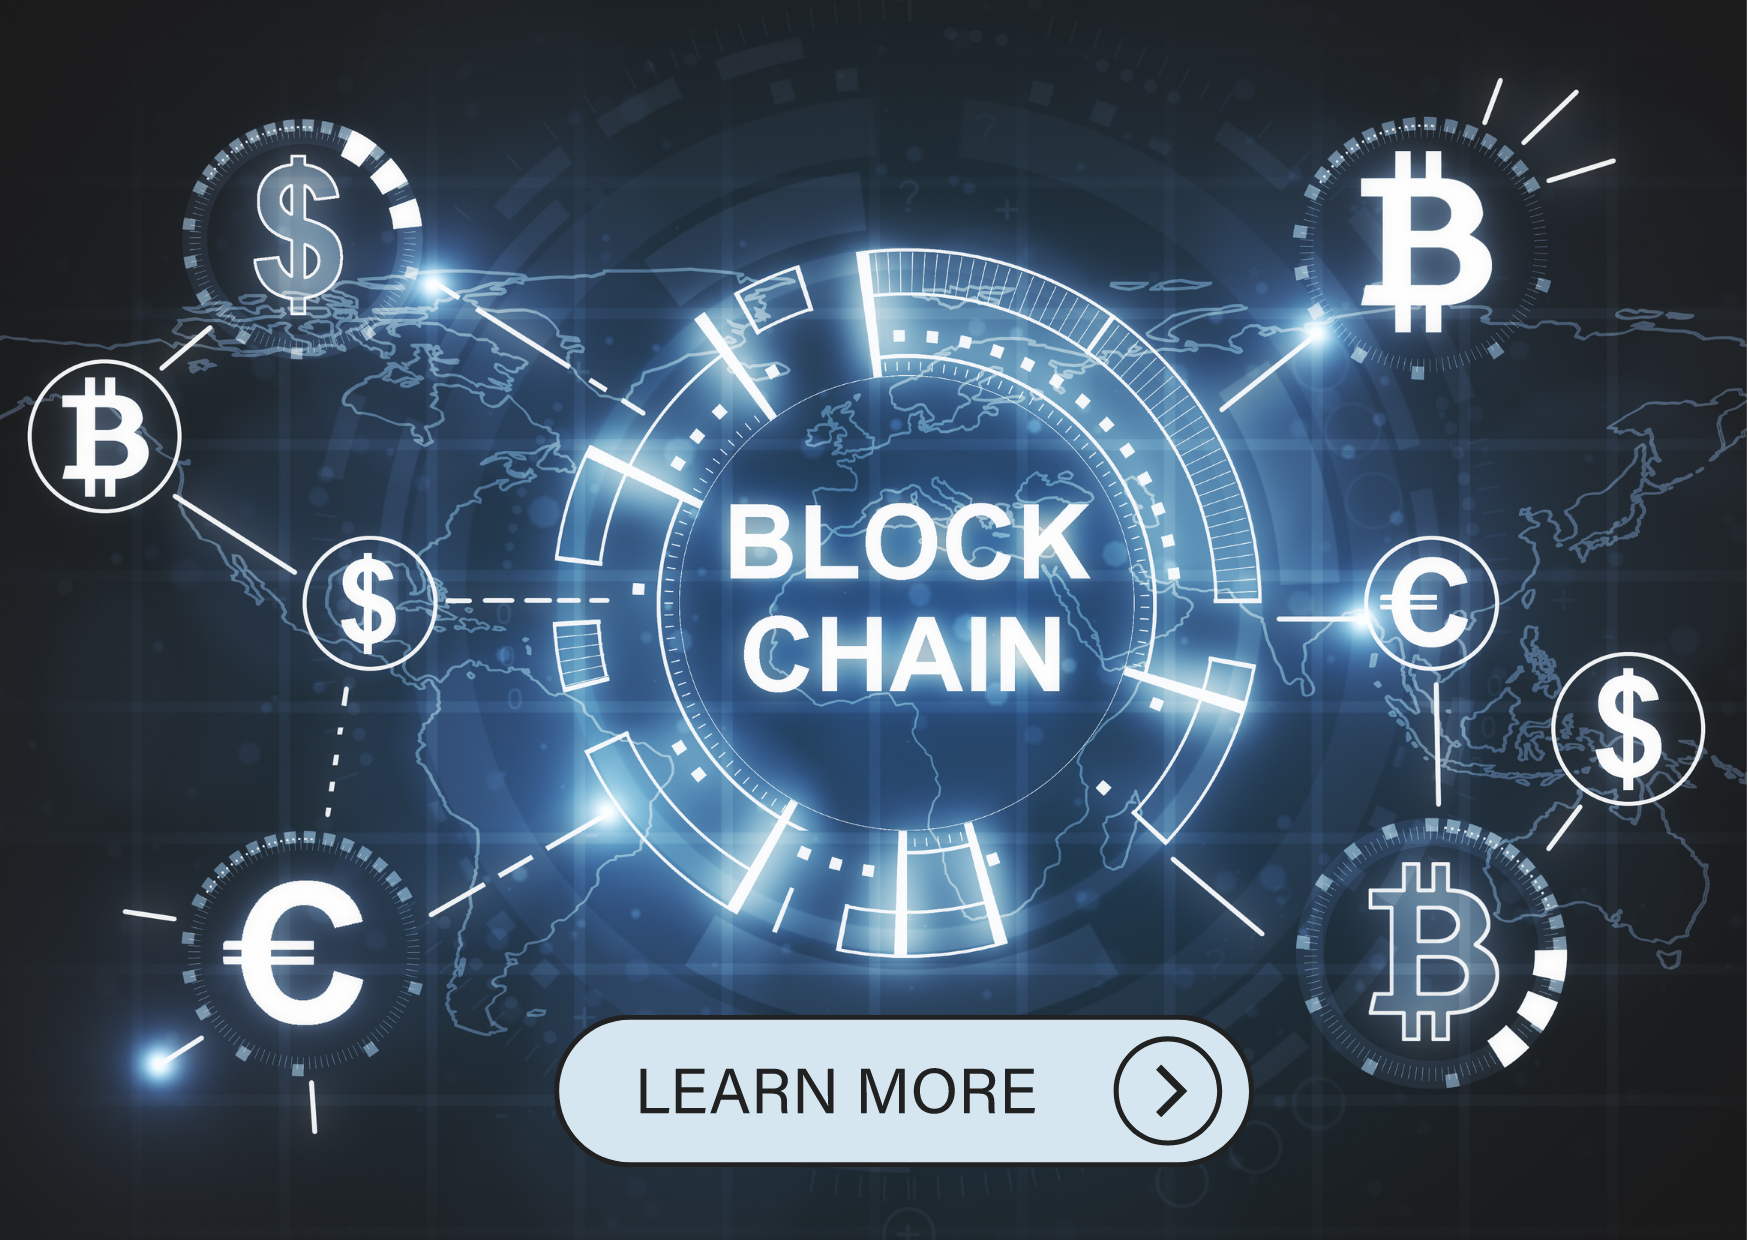 More About BlockChain